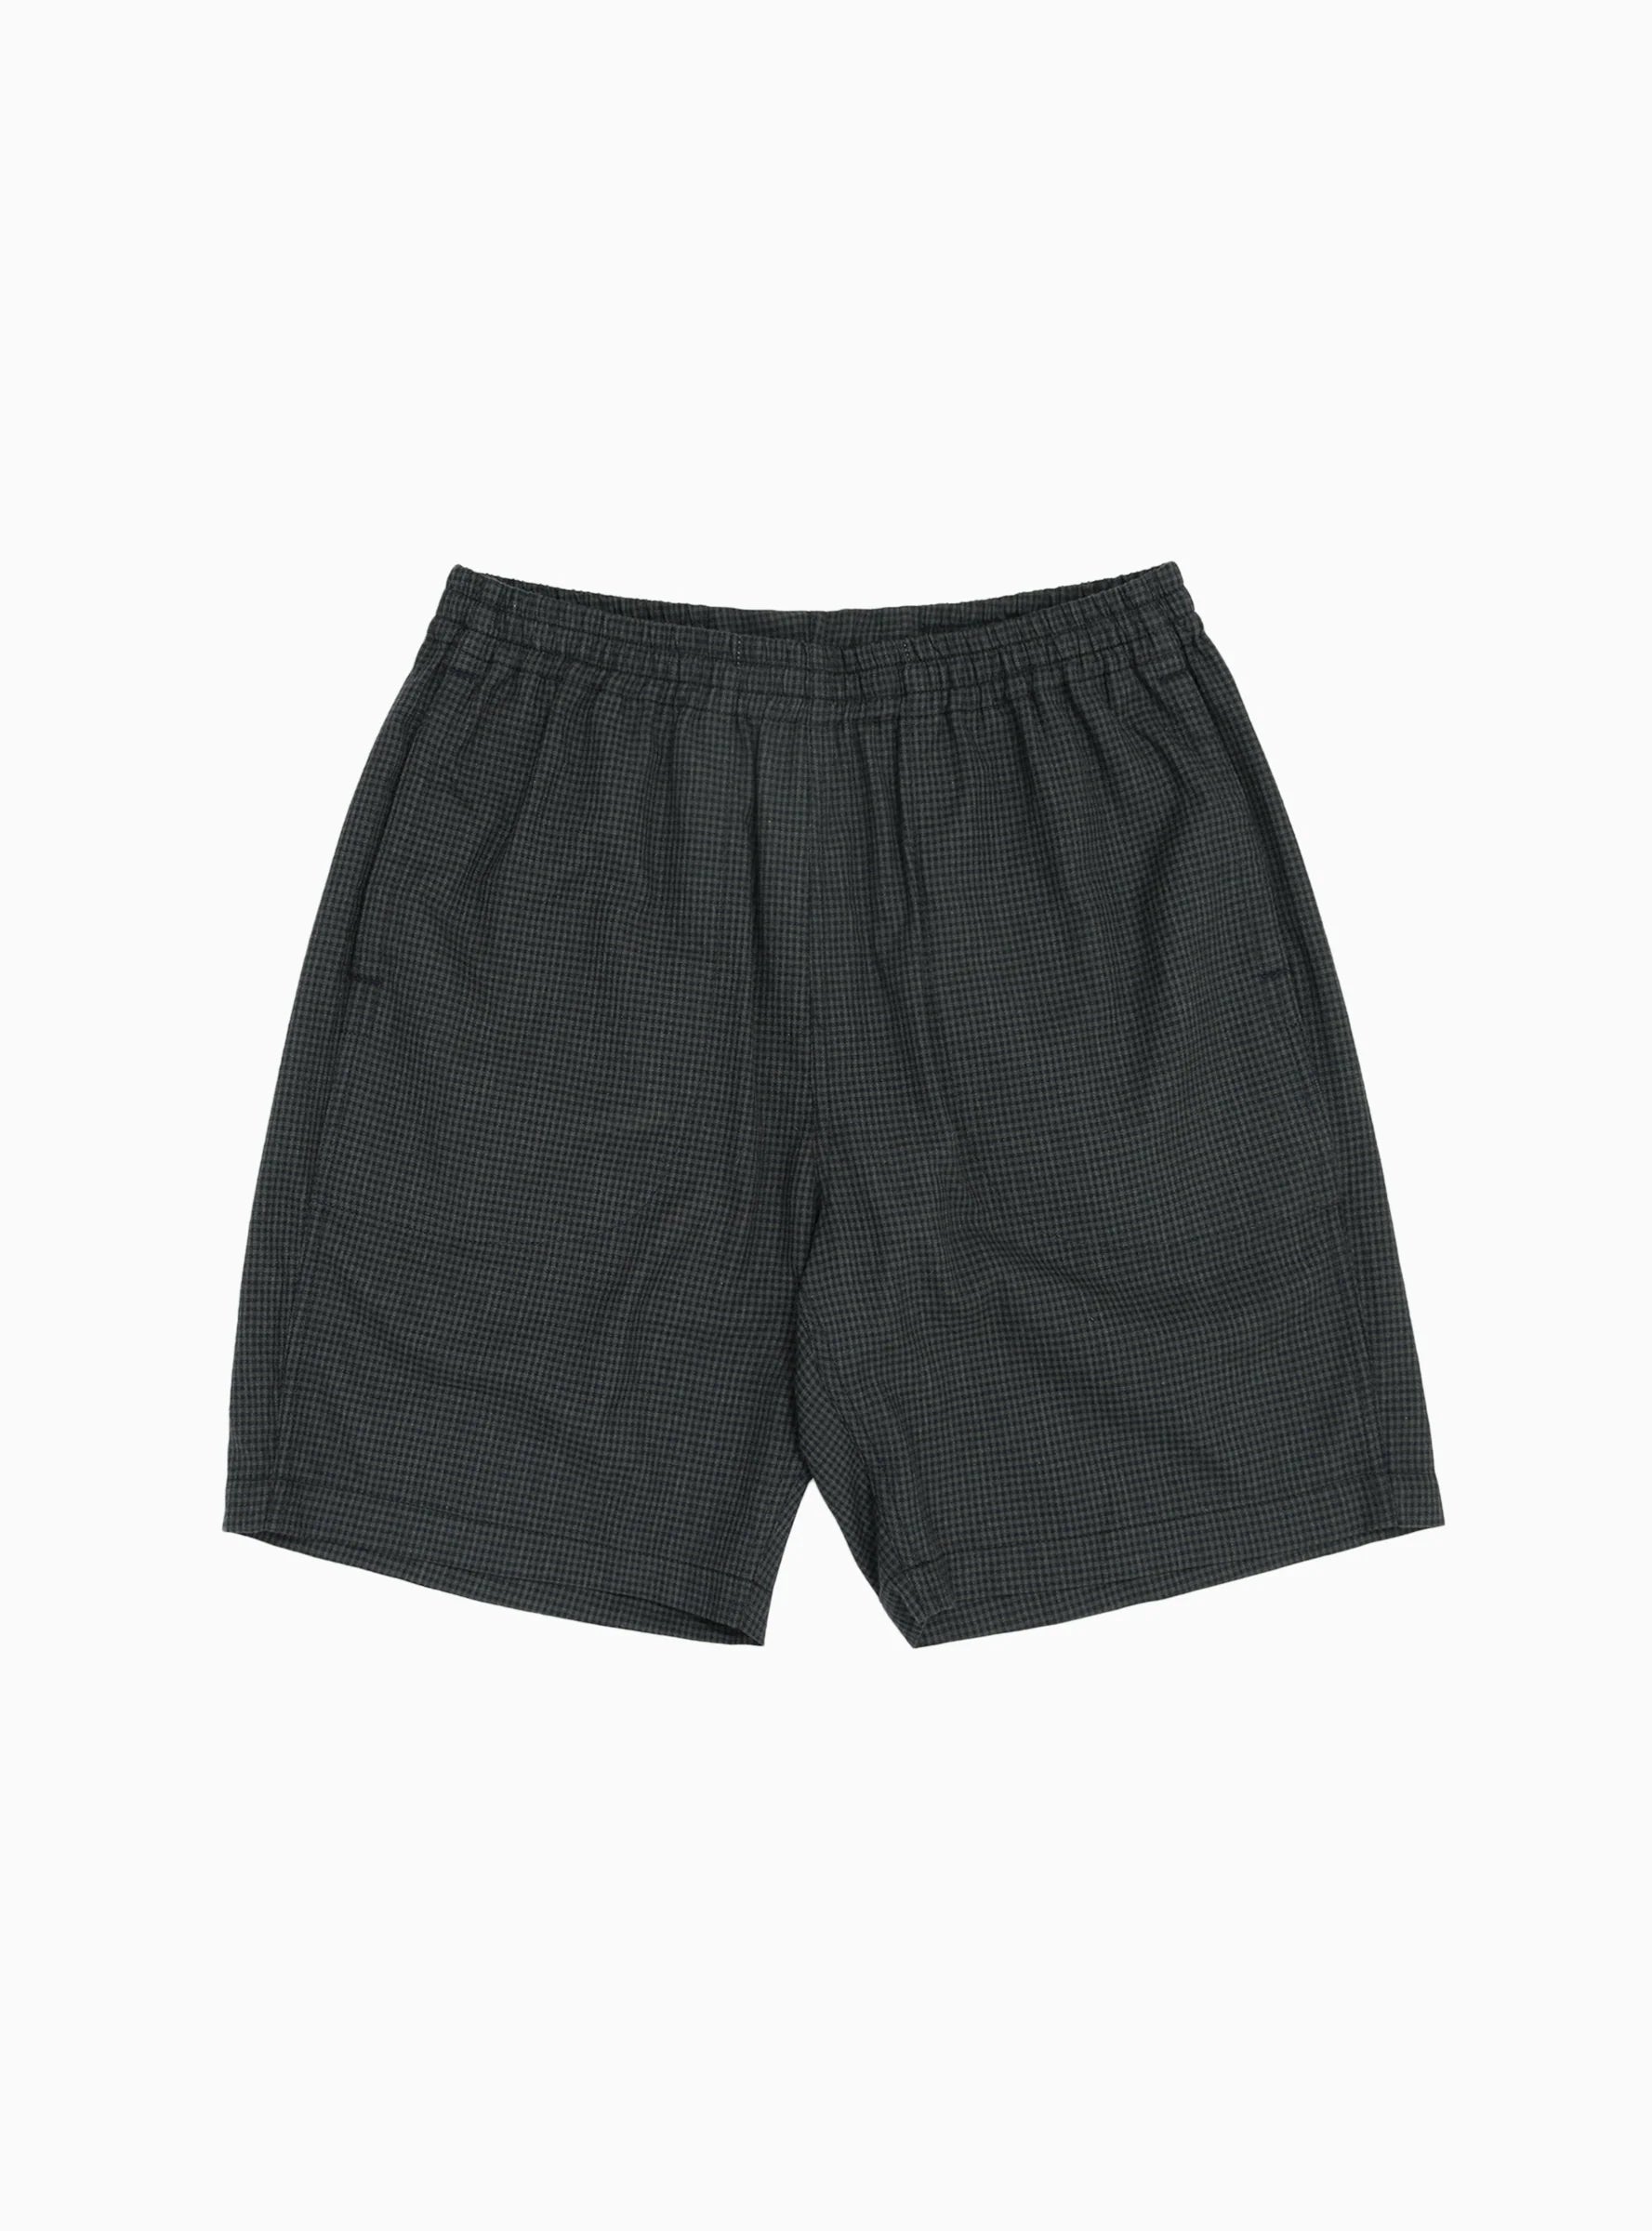 Home Party Shorts Navy Check